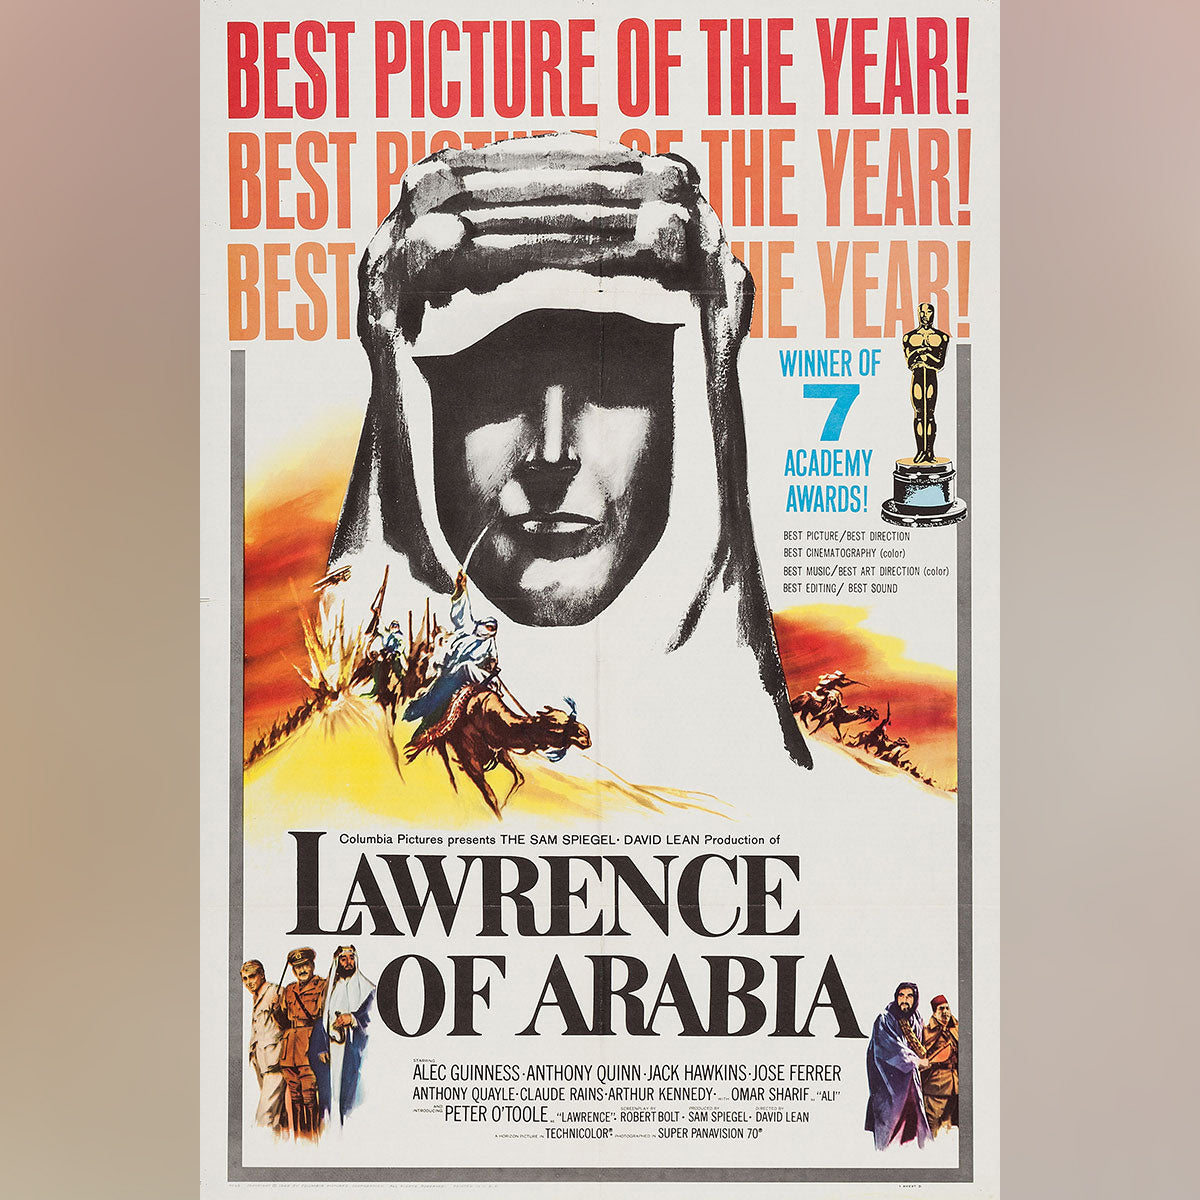 Original Movie Poster of Lawrence Of Arabia (1962)